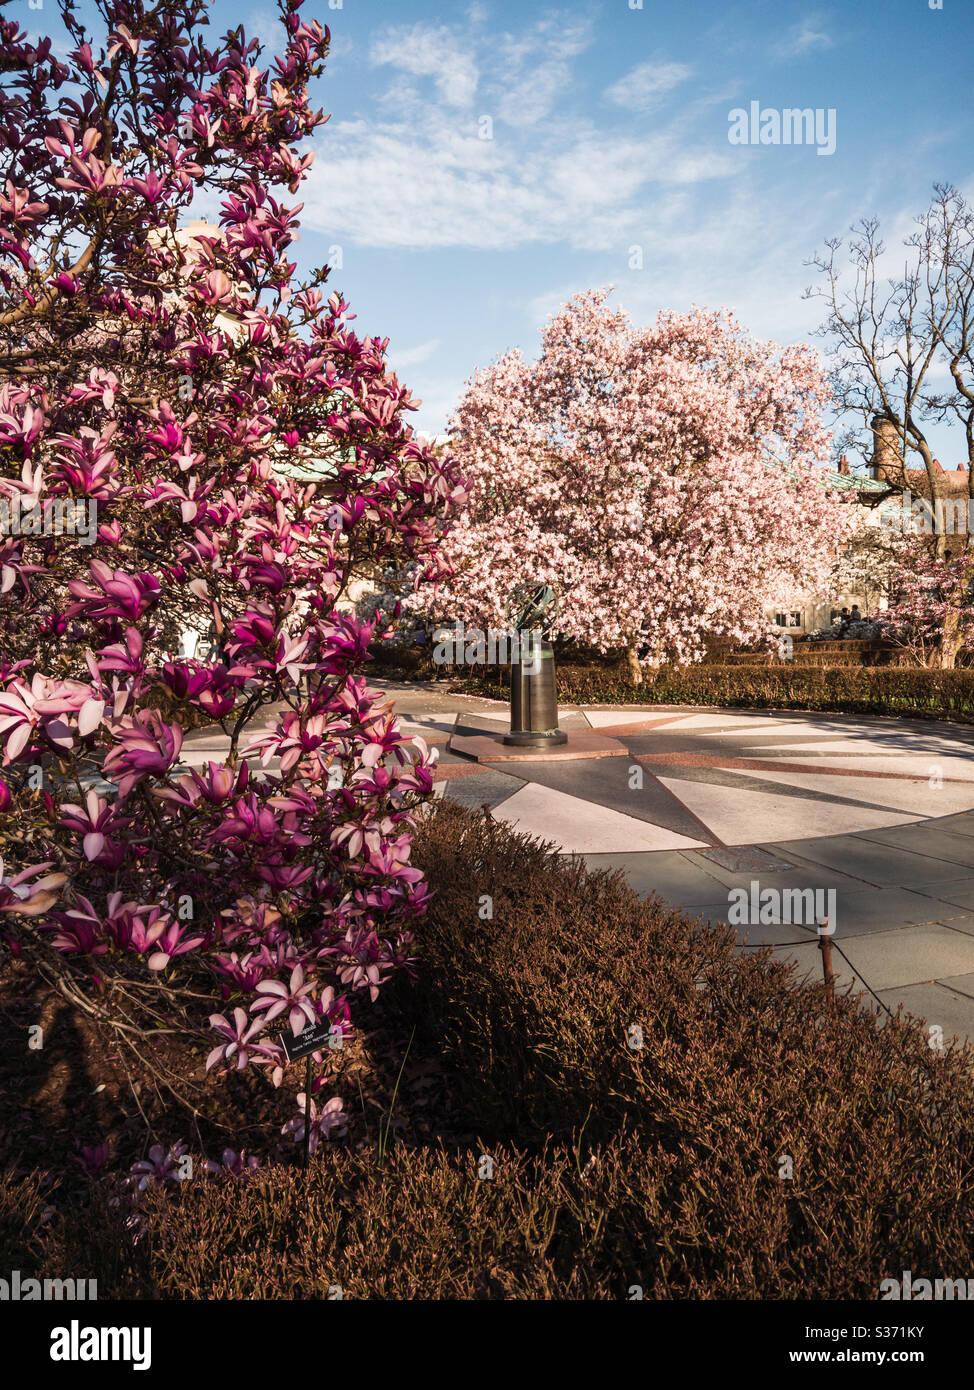 Cherry blossom at the Brooklyn botanical gardens Stock Photo